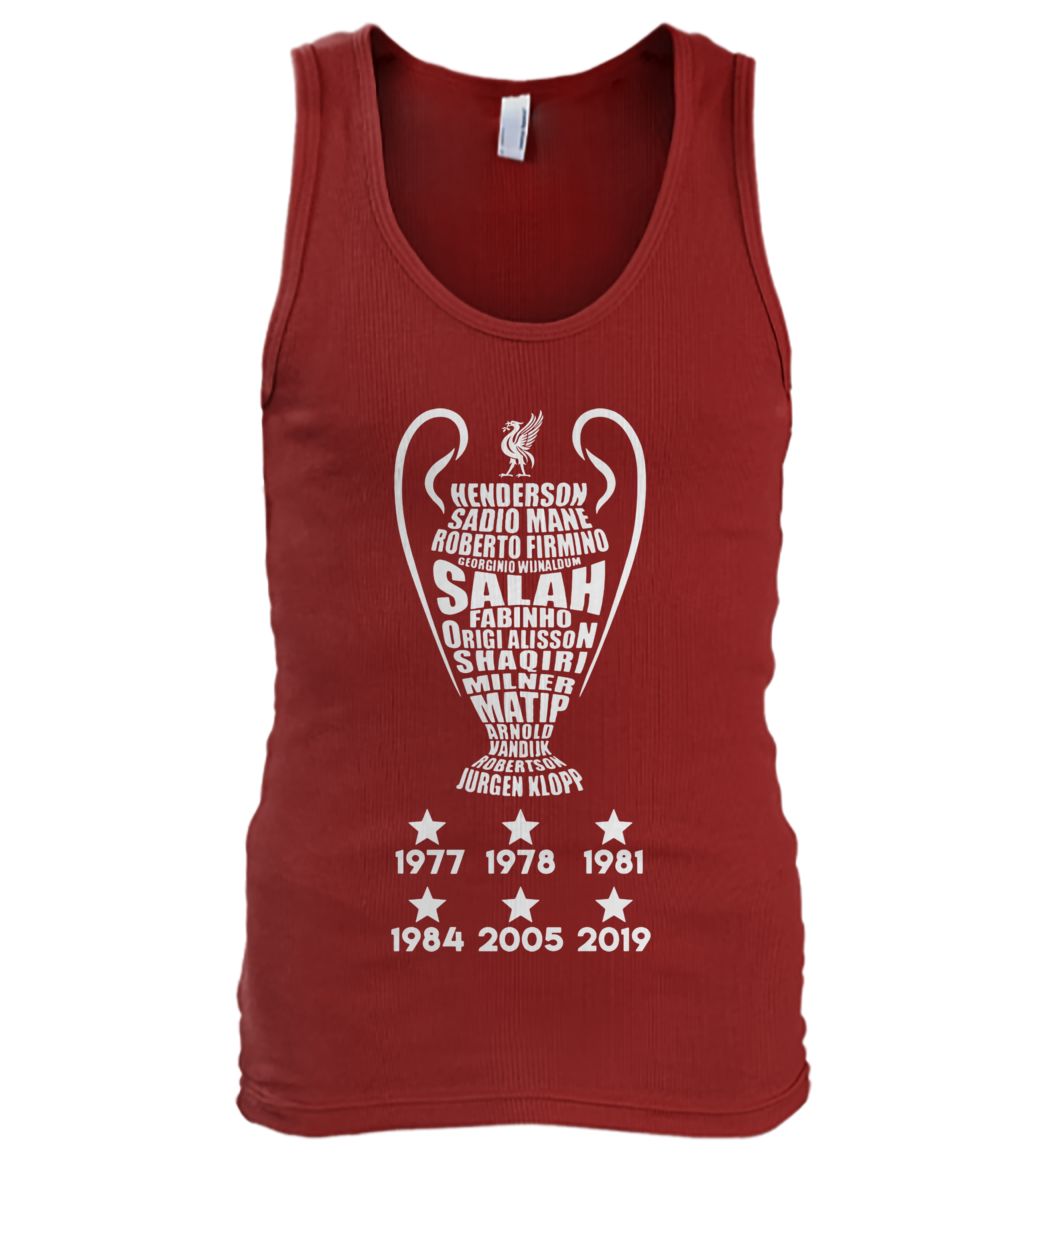 UEFA champions league cup liverpool soccer player's names men's tank top